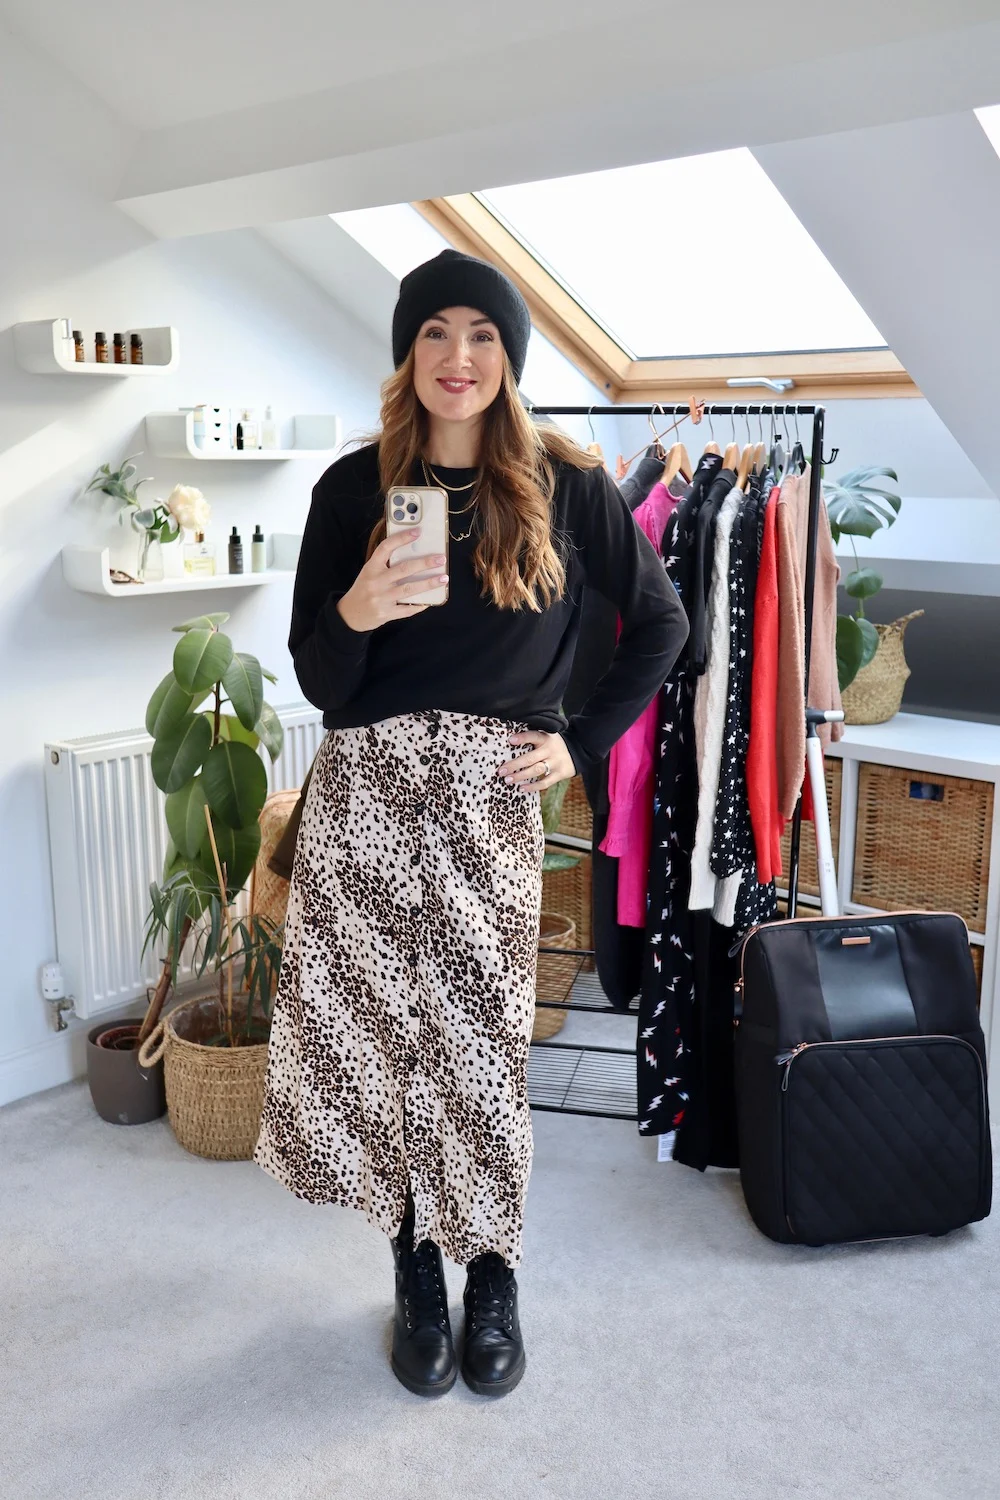 Outfits for winter travel